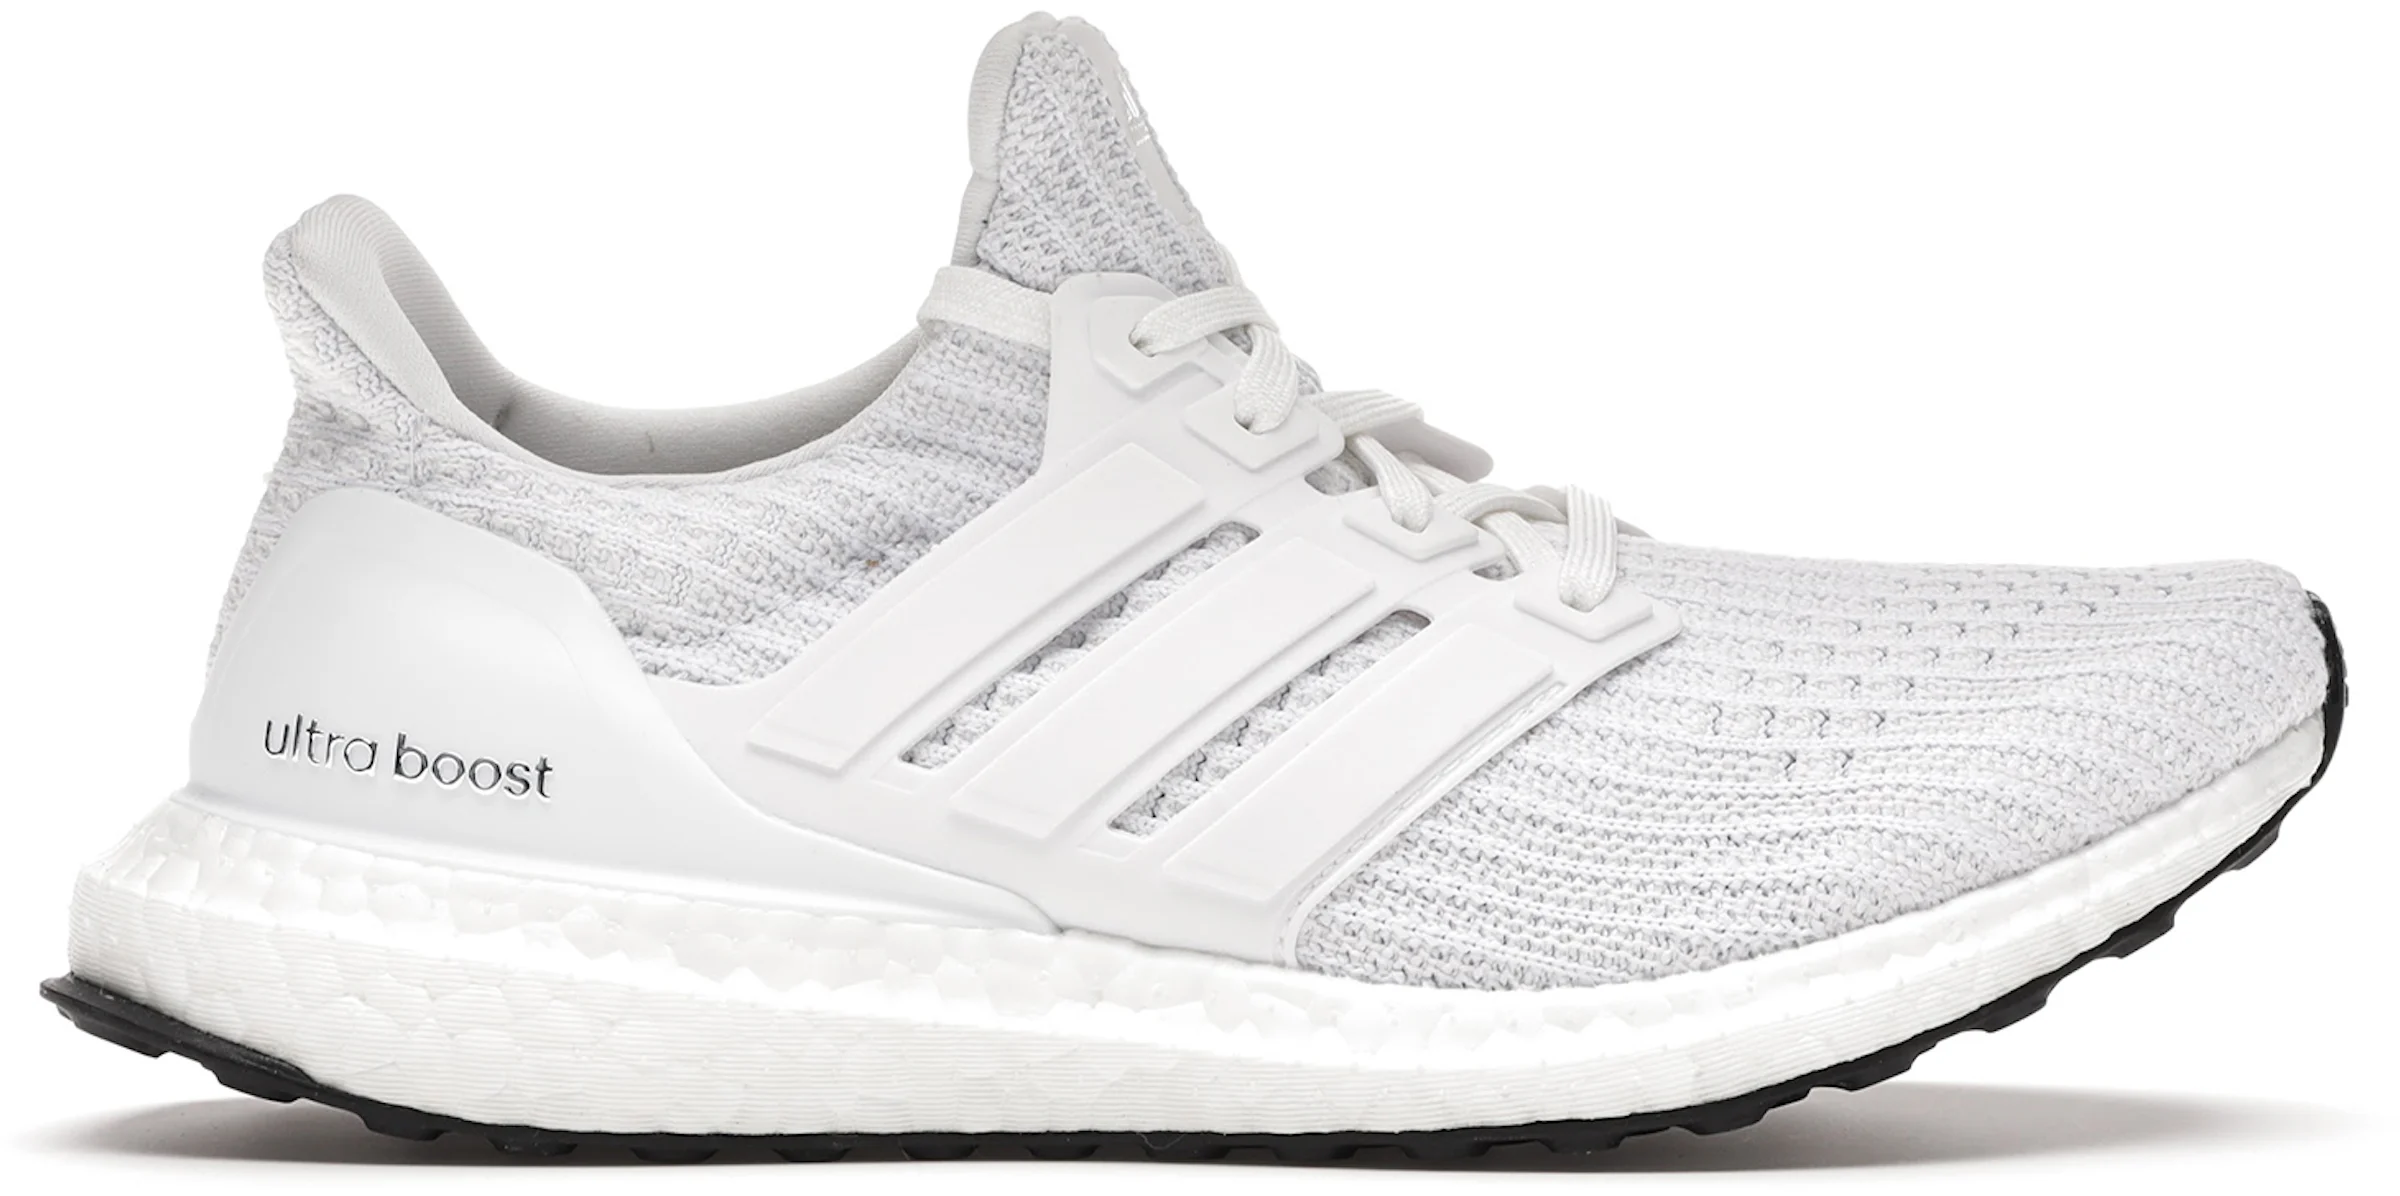 https://images.stockx.com/images/adidas-Ultra-Boost-4-0-Triple-White-W-Product.jpg?fit=fill&bg=FFFFFF&w=1200&h=857&fm=webp&auto=compress&dpr=2&trim=color&updated_at=1612901004&q=60